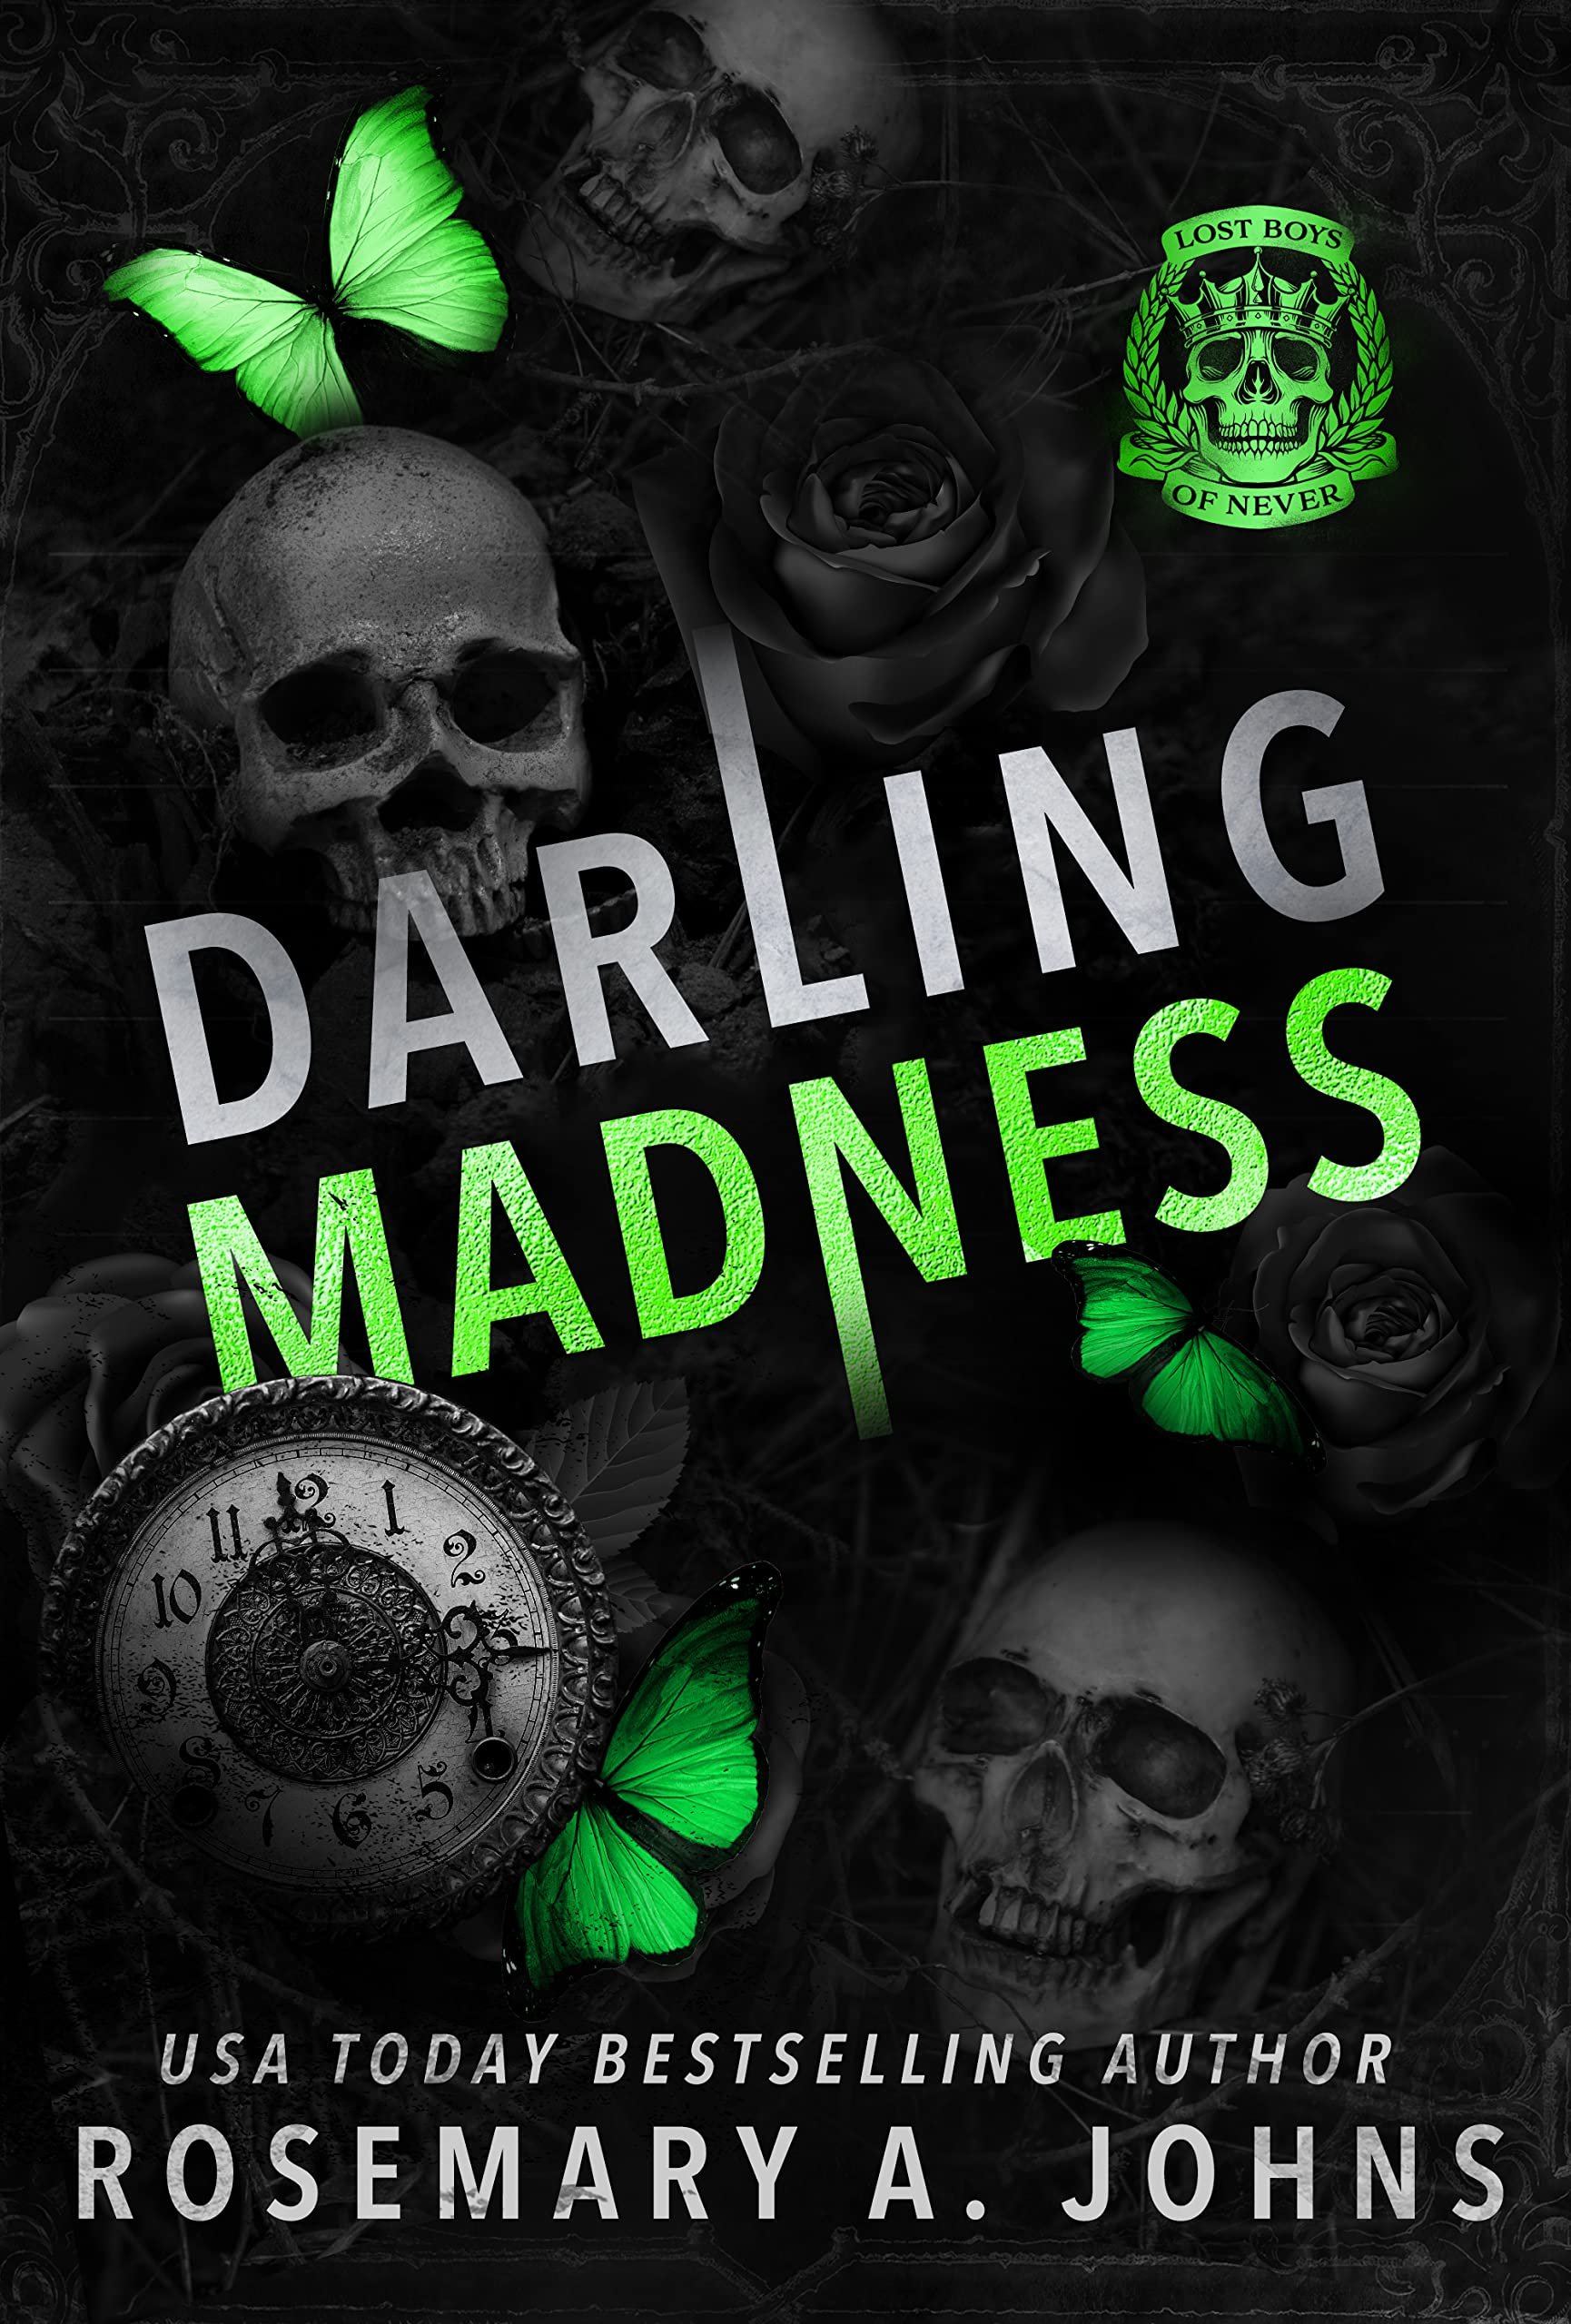 Darling Madness (Lost Boys of Never) Cover